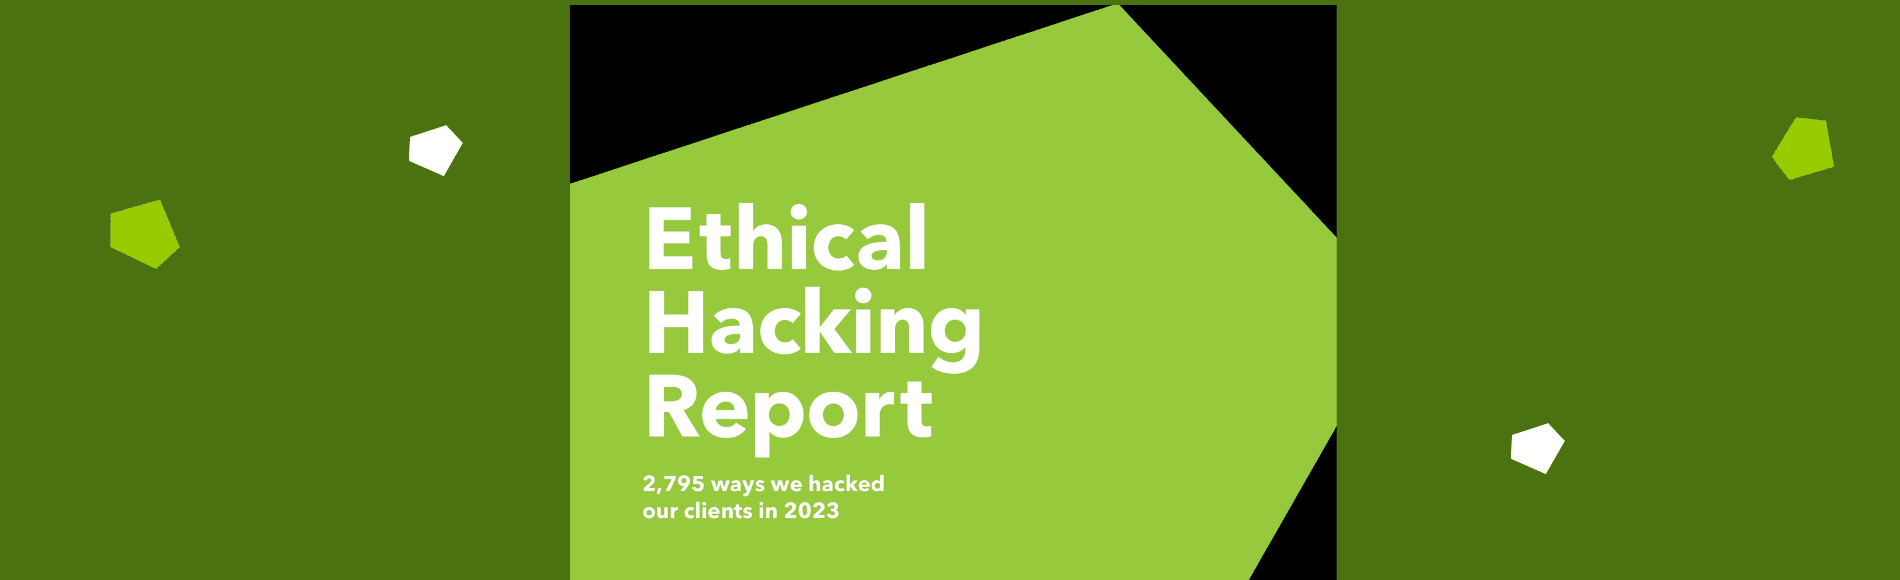 Ethical Hacking Report 2023: The most vulnerable systems are Web, Cloud and Infrastructure.